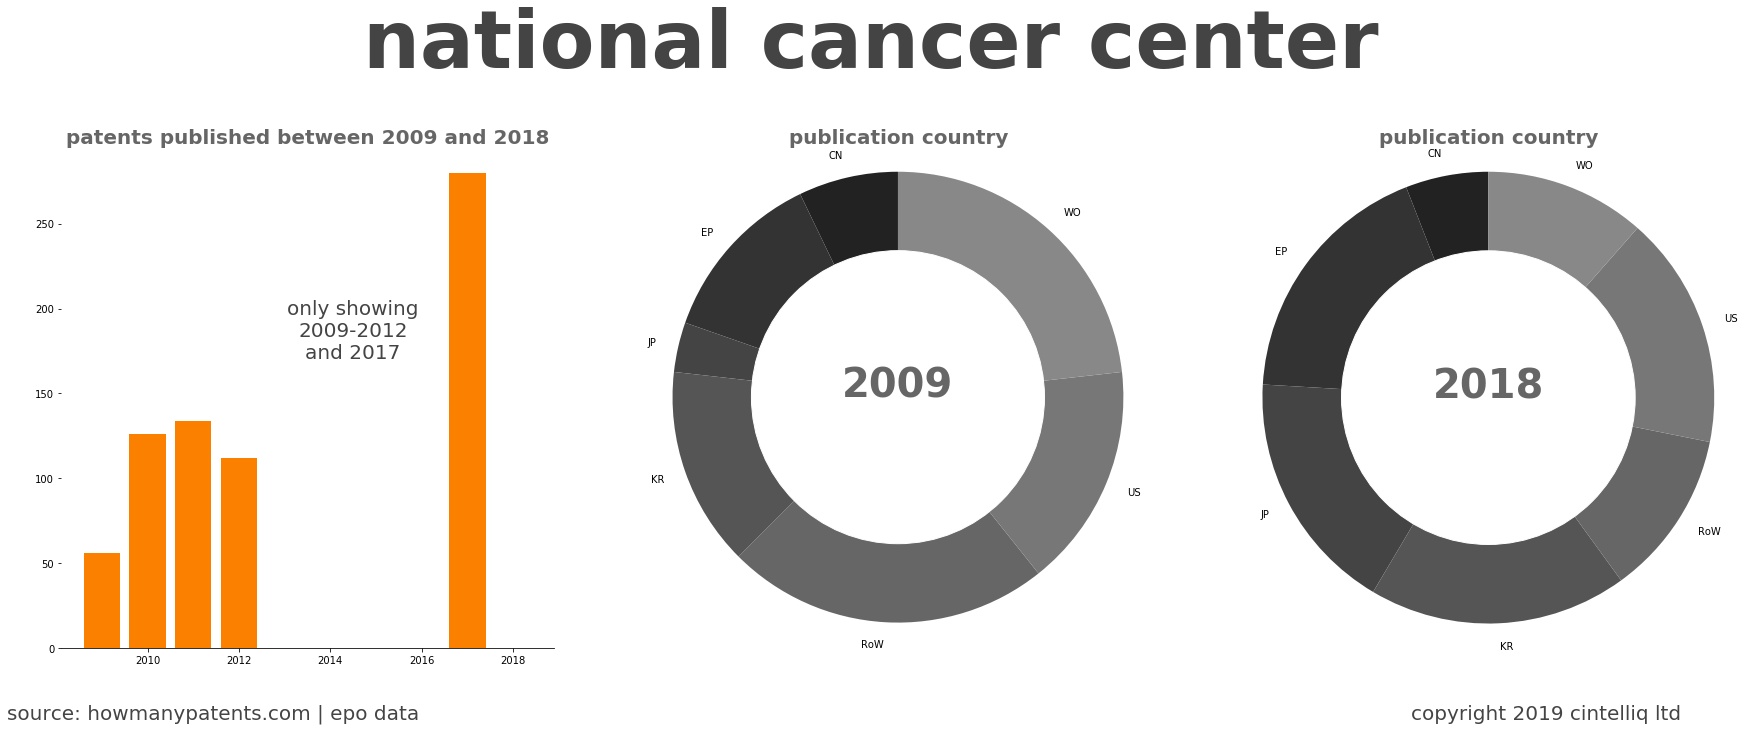 summary of patents for National Cancer Center